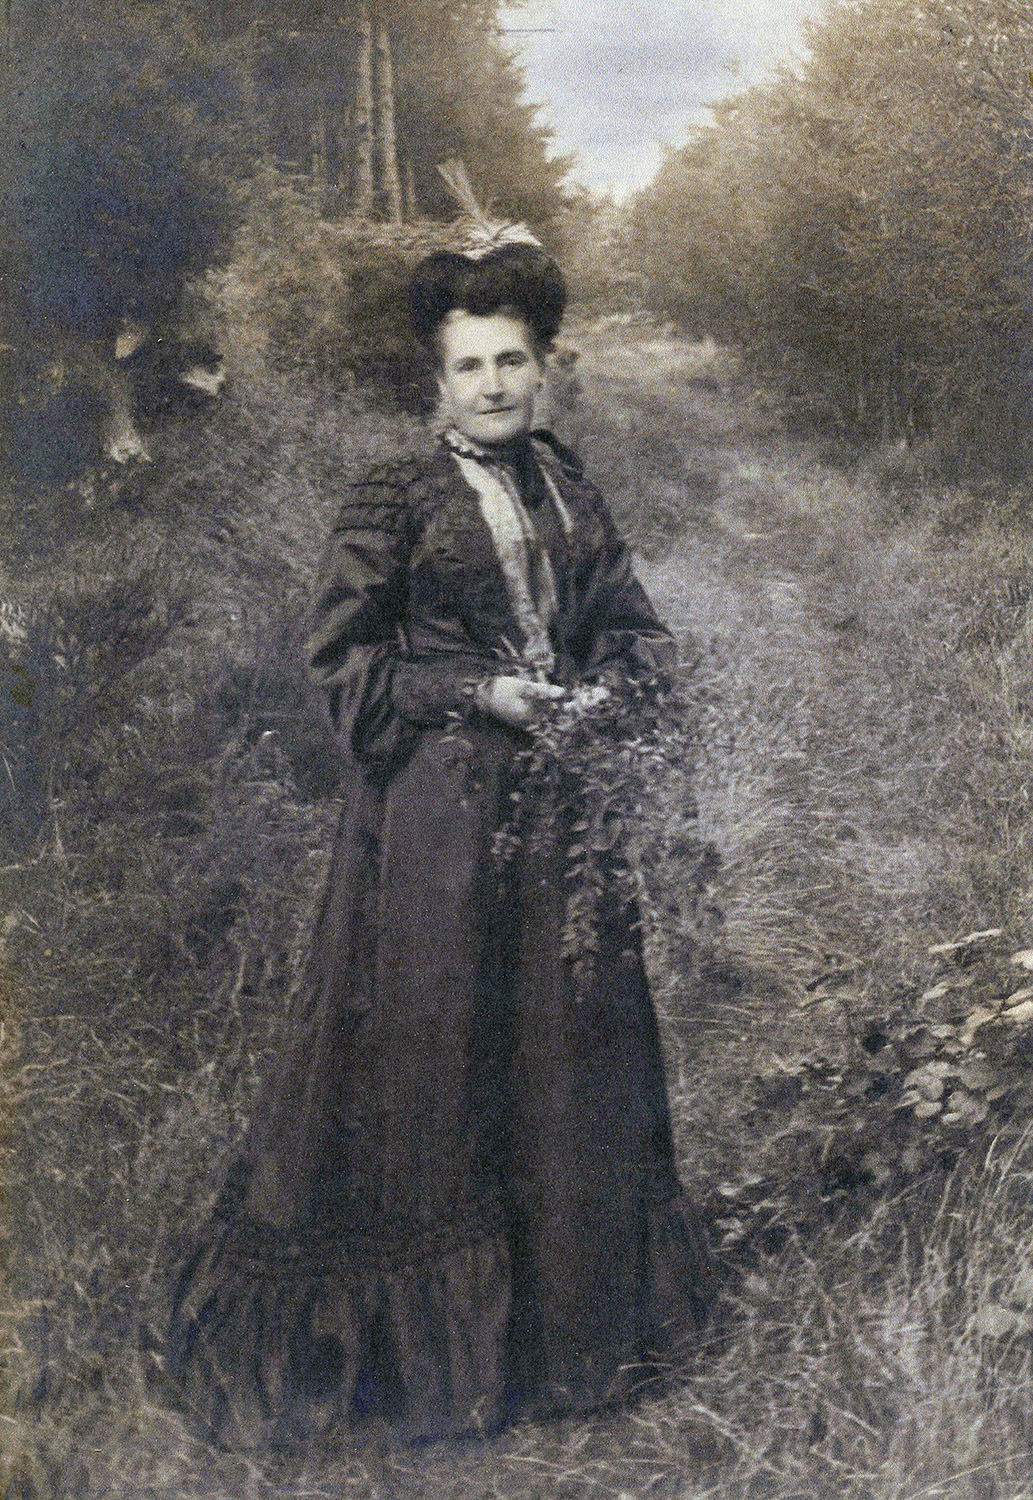 Elizabeth Glover nee Lester taking a walk through the Axnfell Plantation aged about 59, the Photo was taken by her son Charles Wallace Glover c.1903